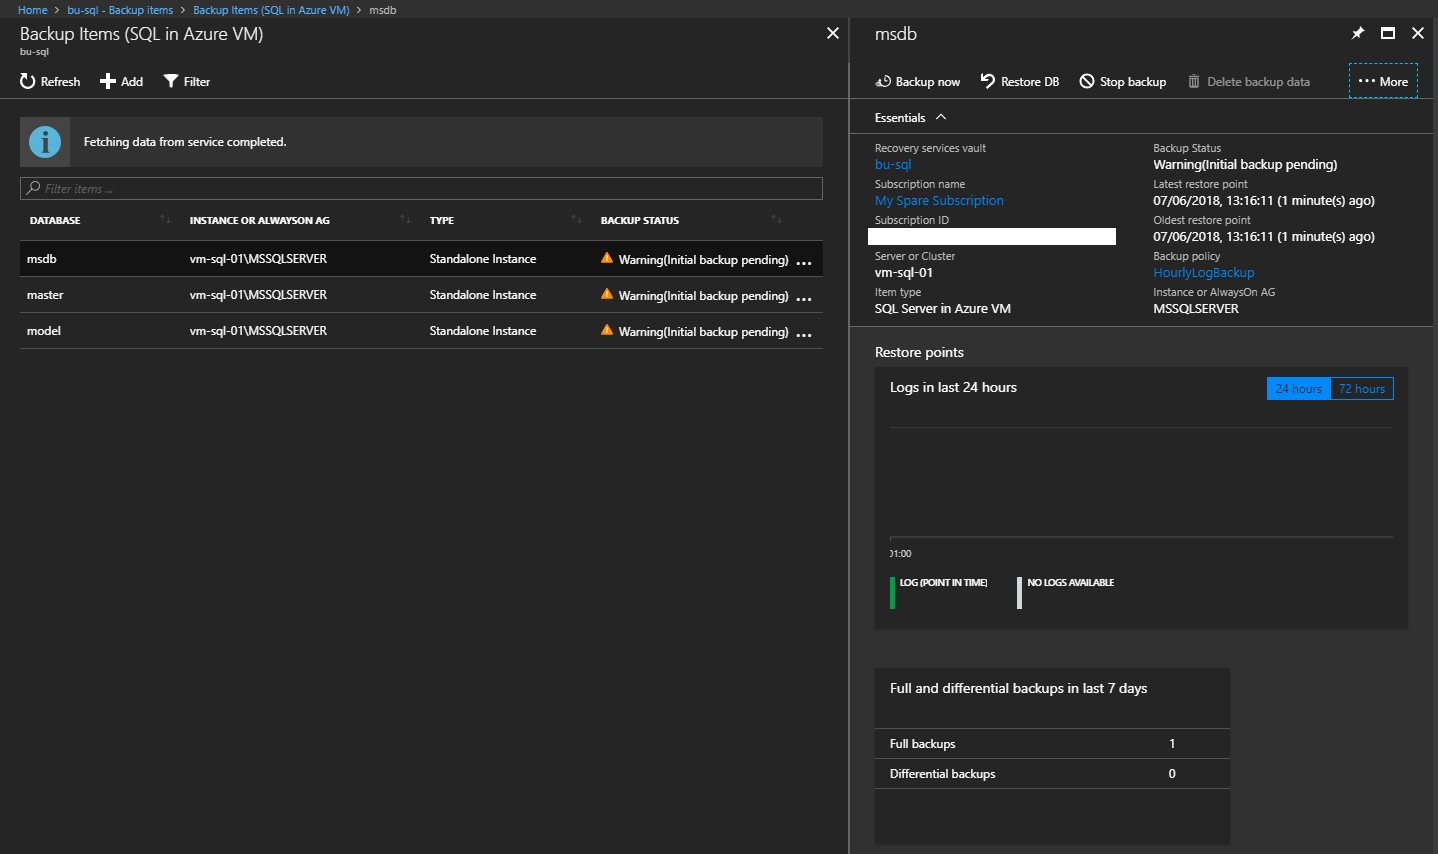 The protected databases in Azure Backup [Image Credit: Aidan Finn]